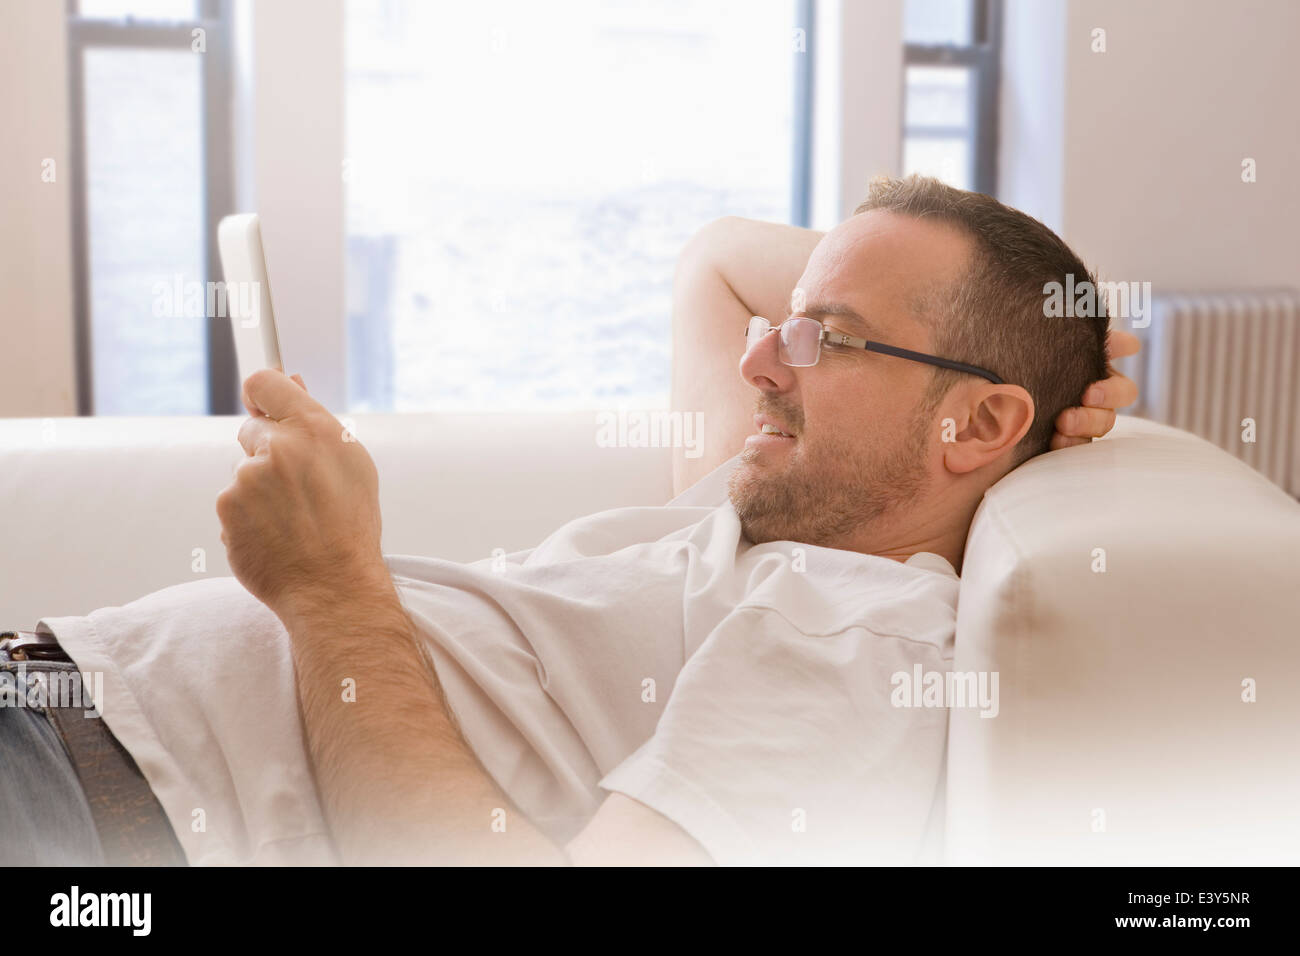 Man reclining on sofa looking at digital tablet Banque D'Images